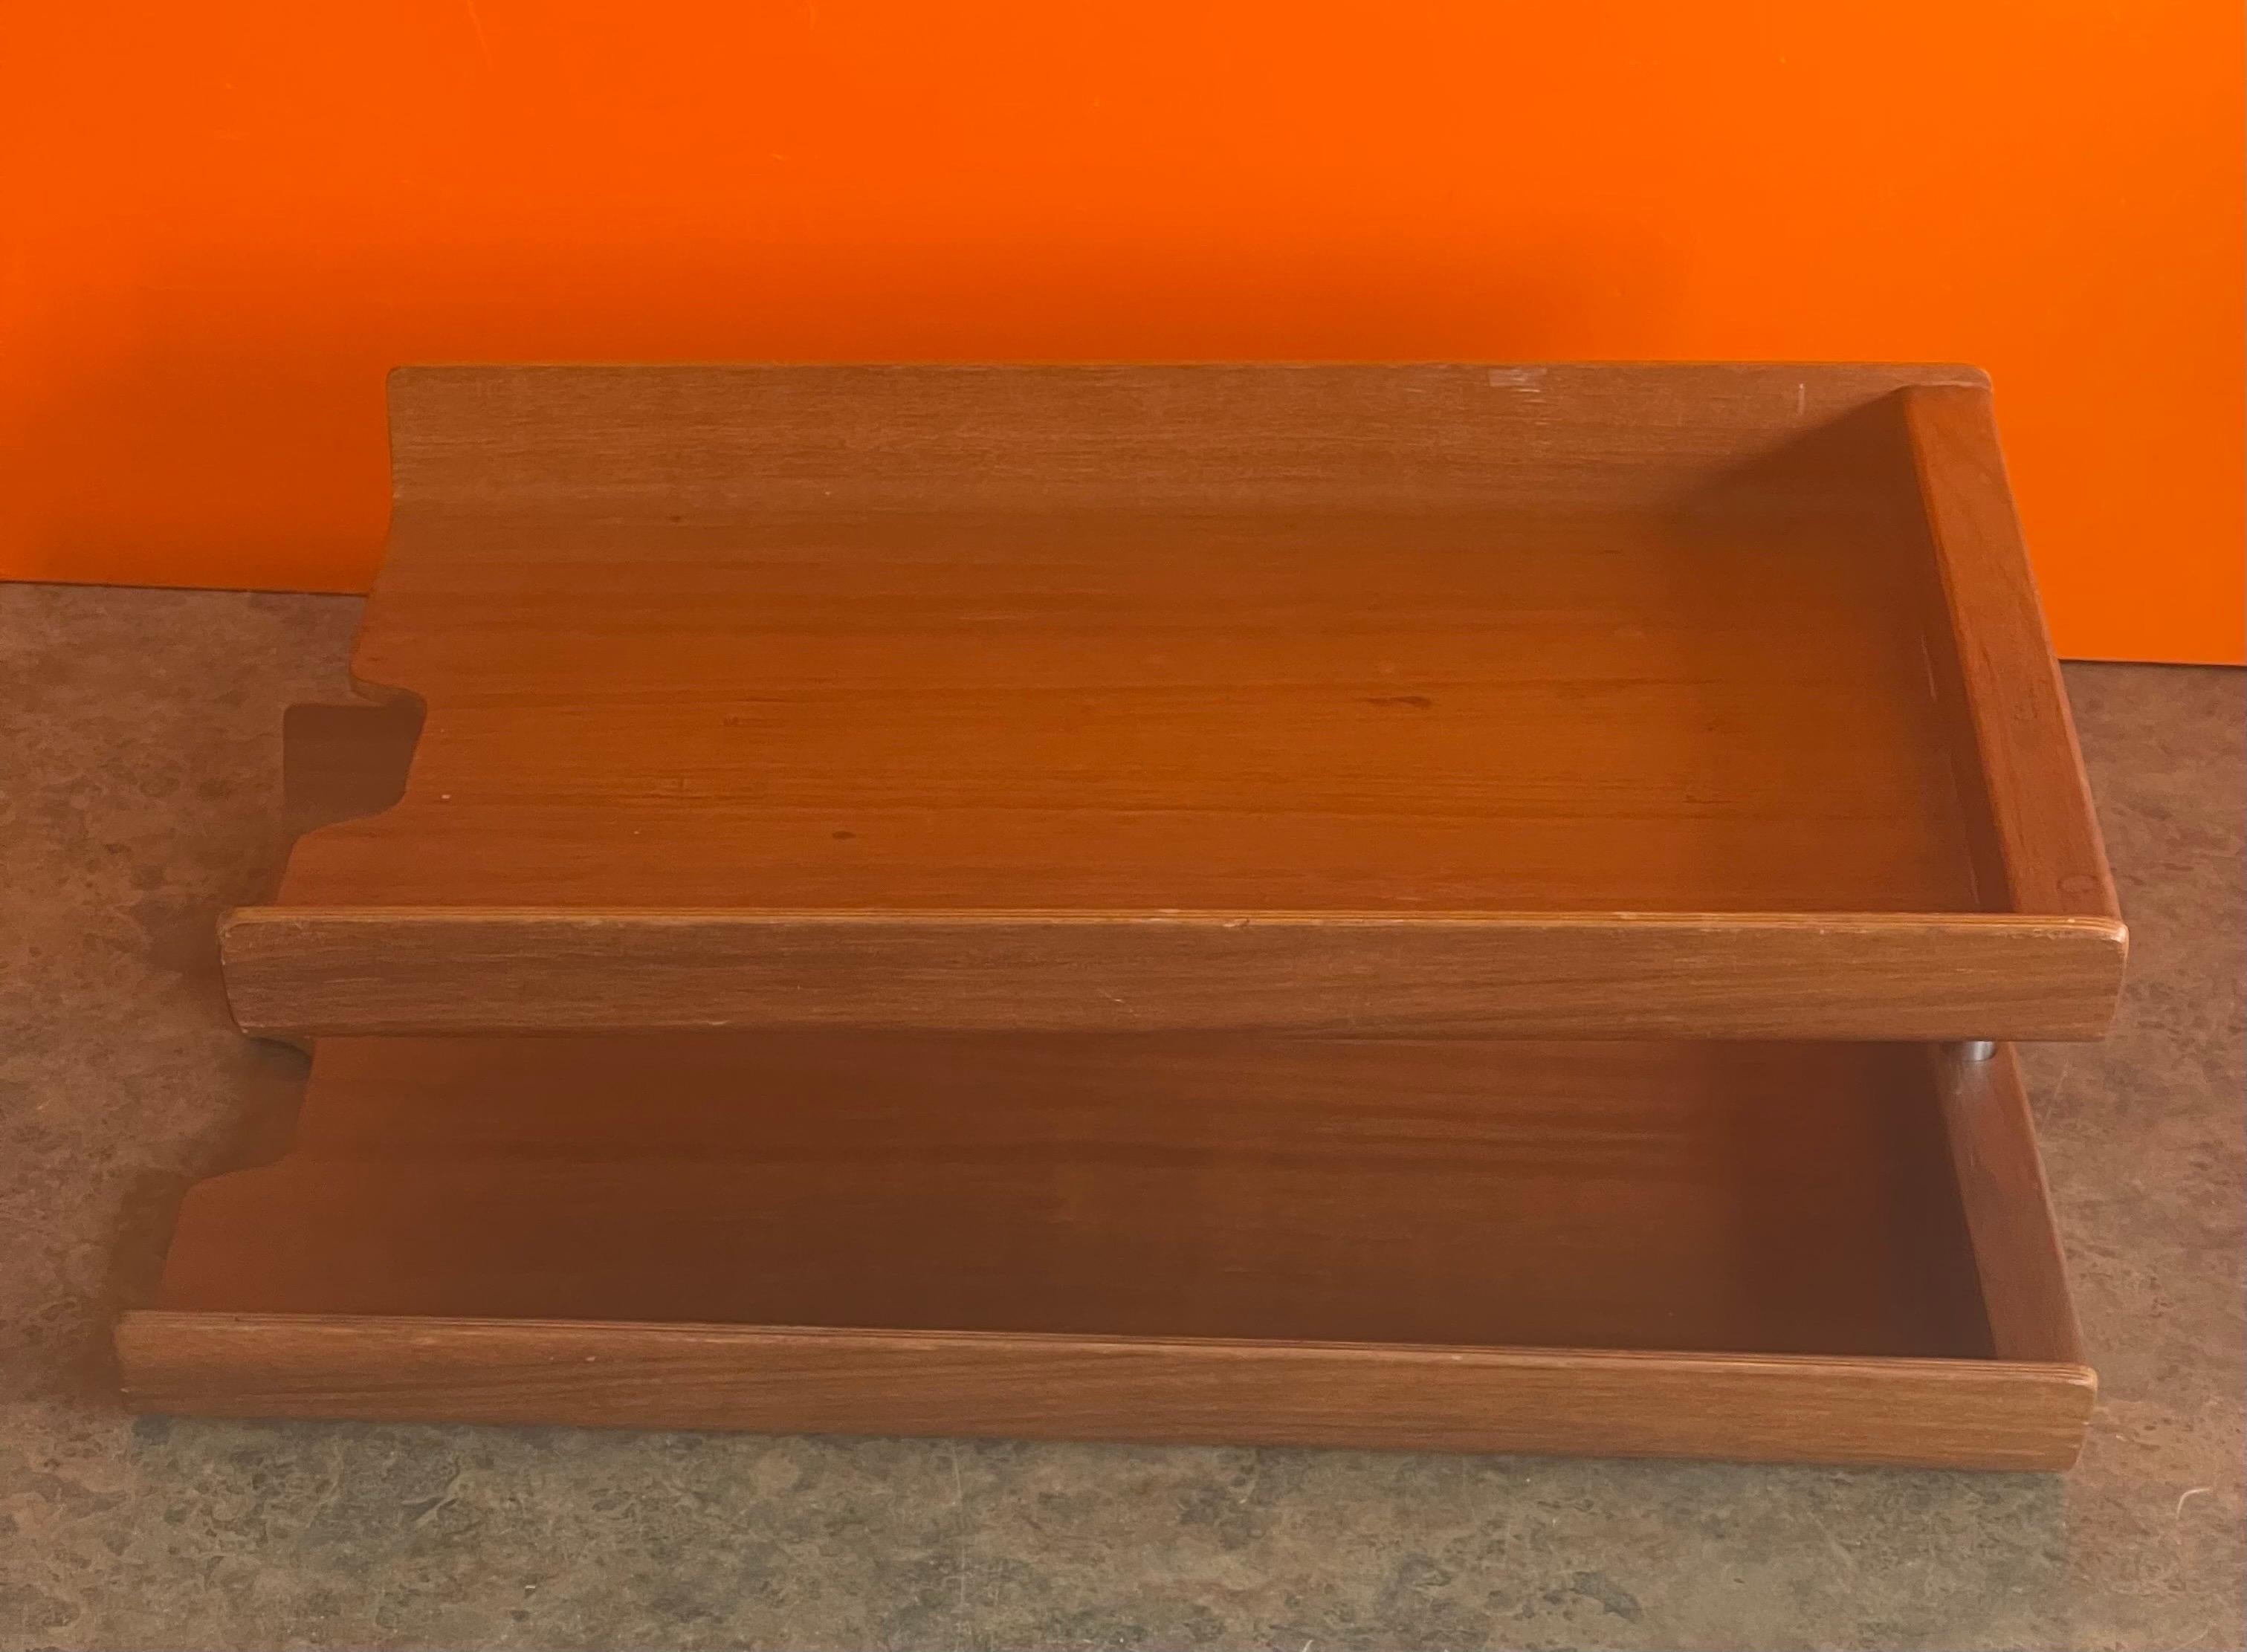 Molded Teak Plywood Double Letter Tray by Martin Aberg for Rainbow of Sweden In Good Condition For Sale In San Diego, CA